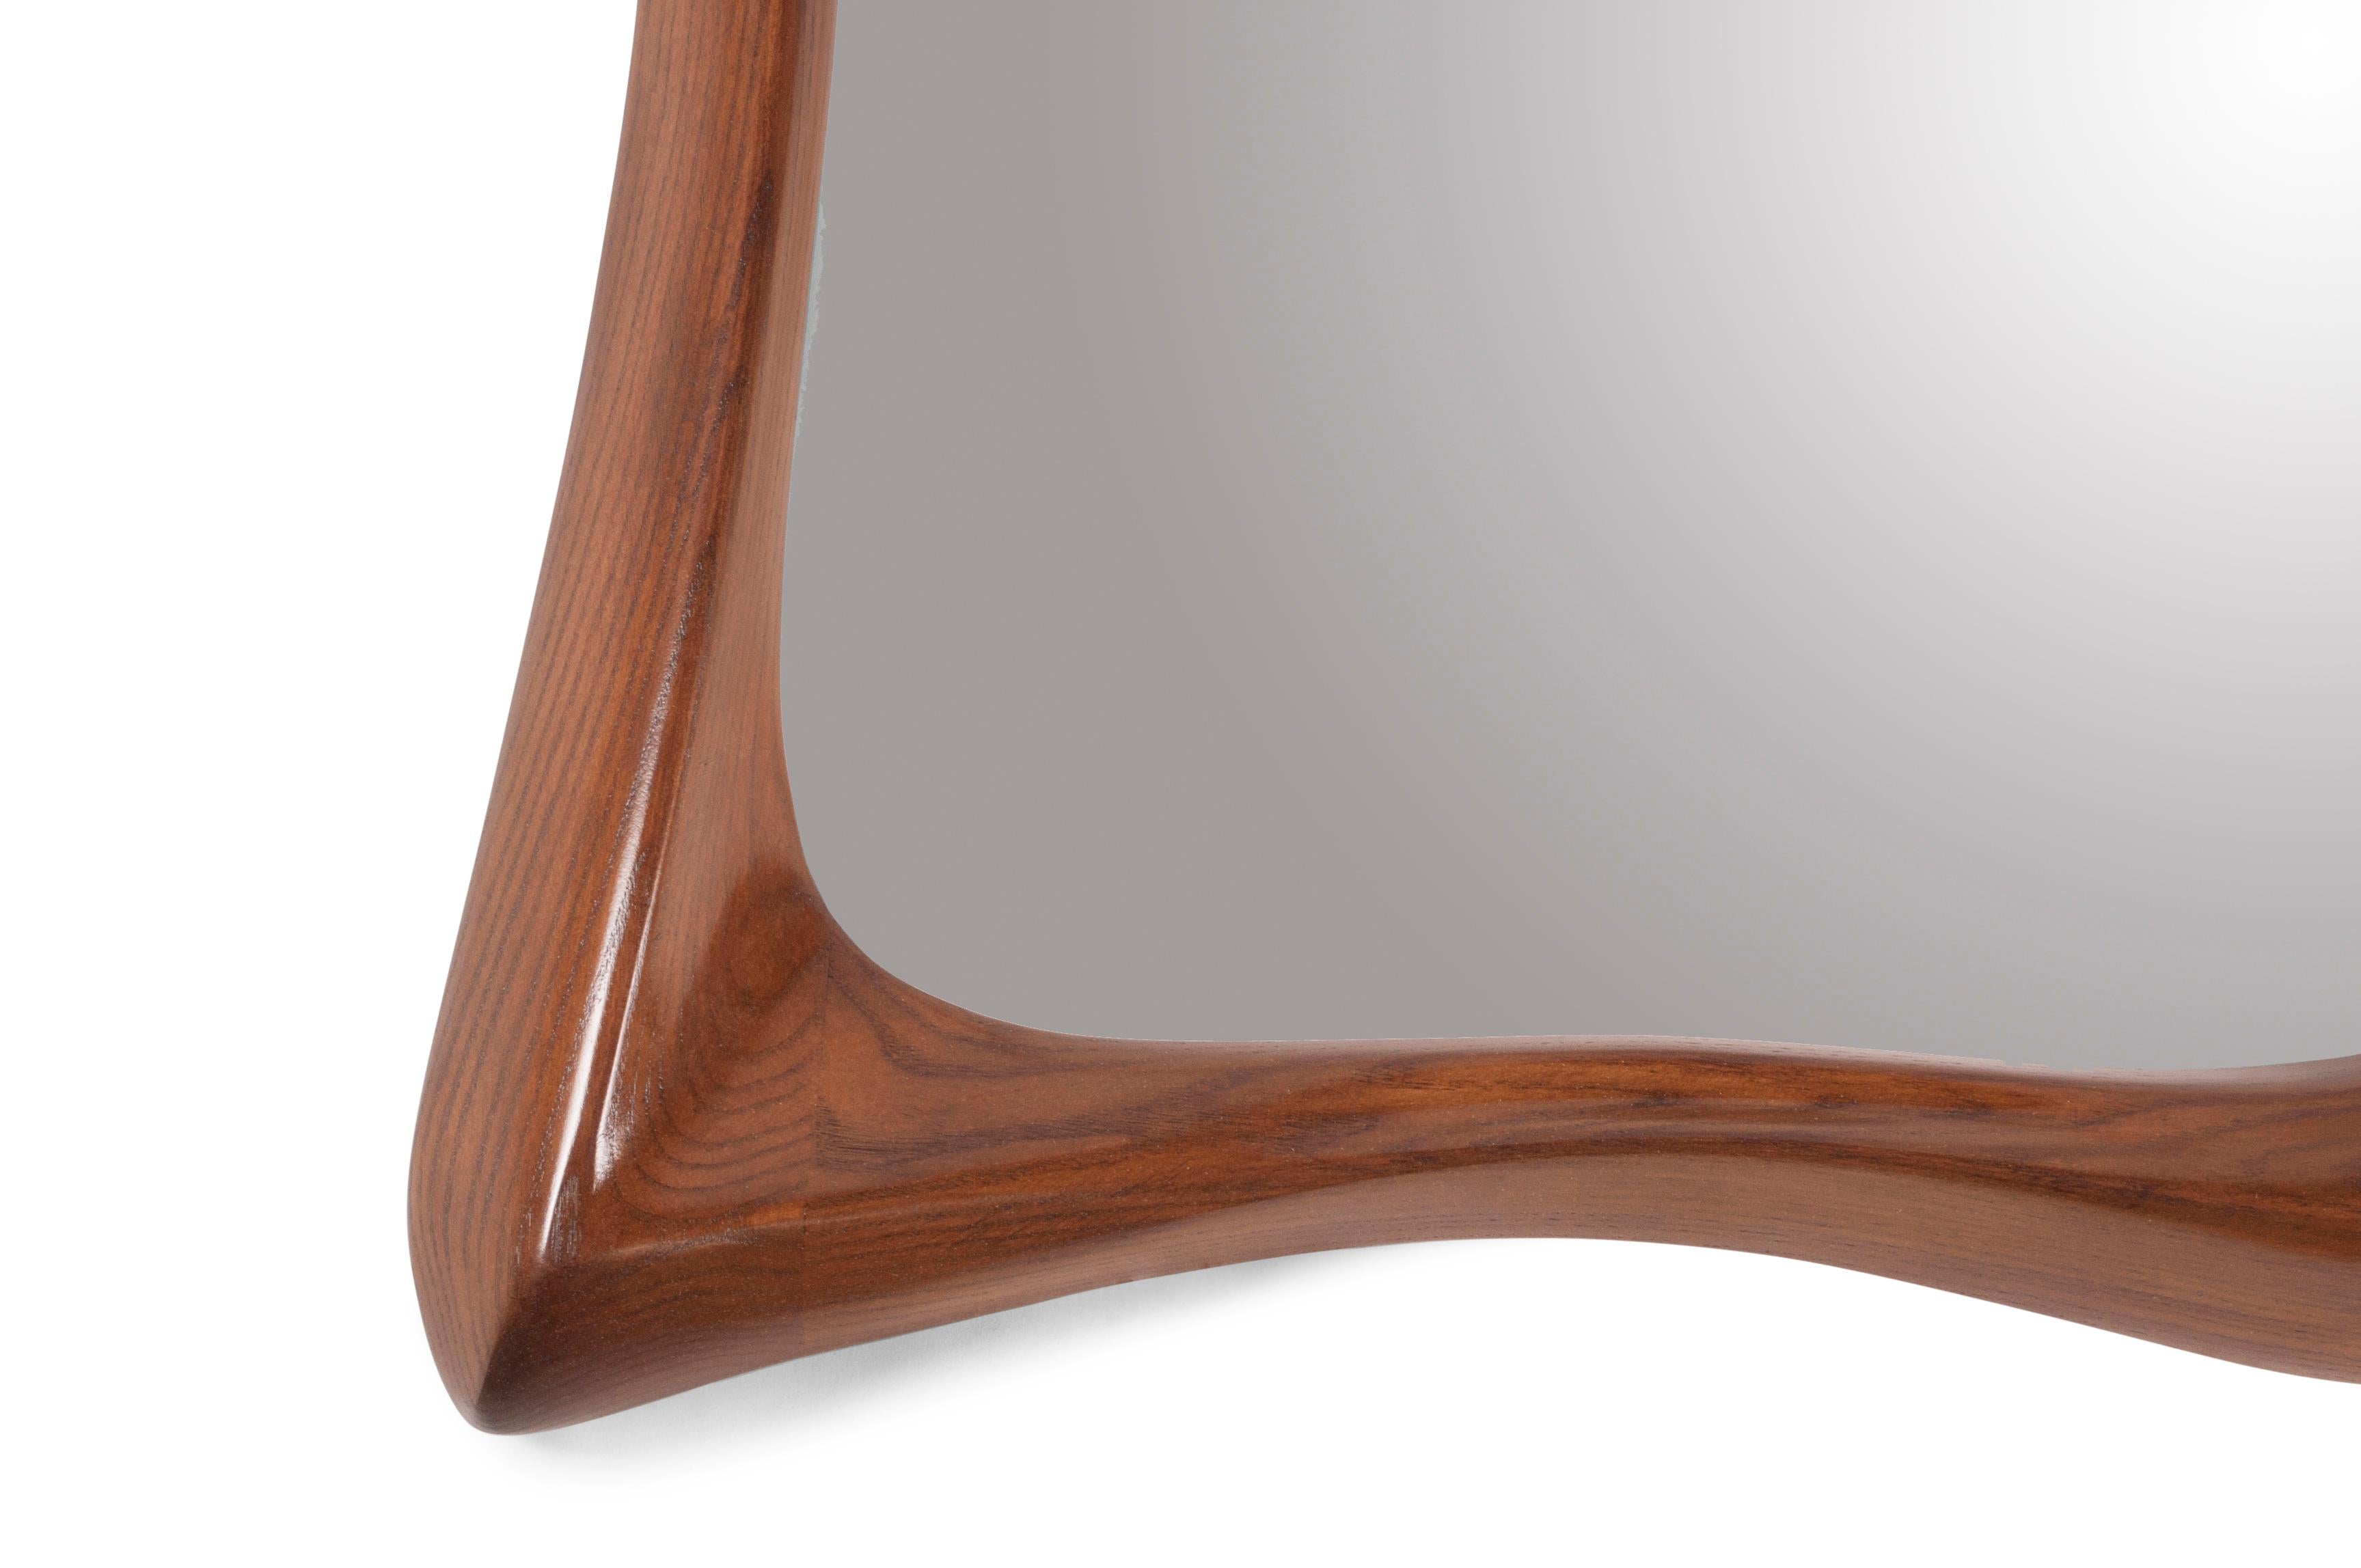 American Amorph Narcissus Mirror Walnut stain on Ash wood  For Sale